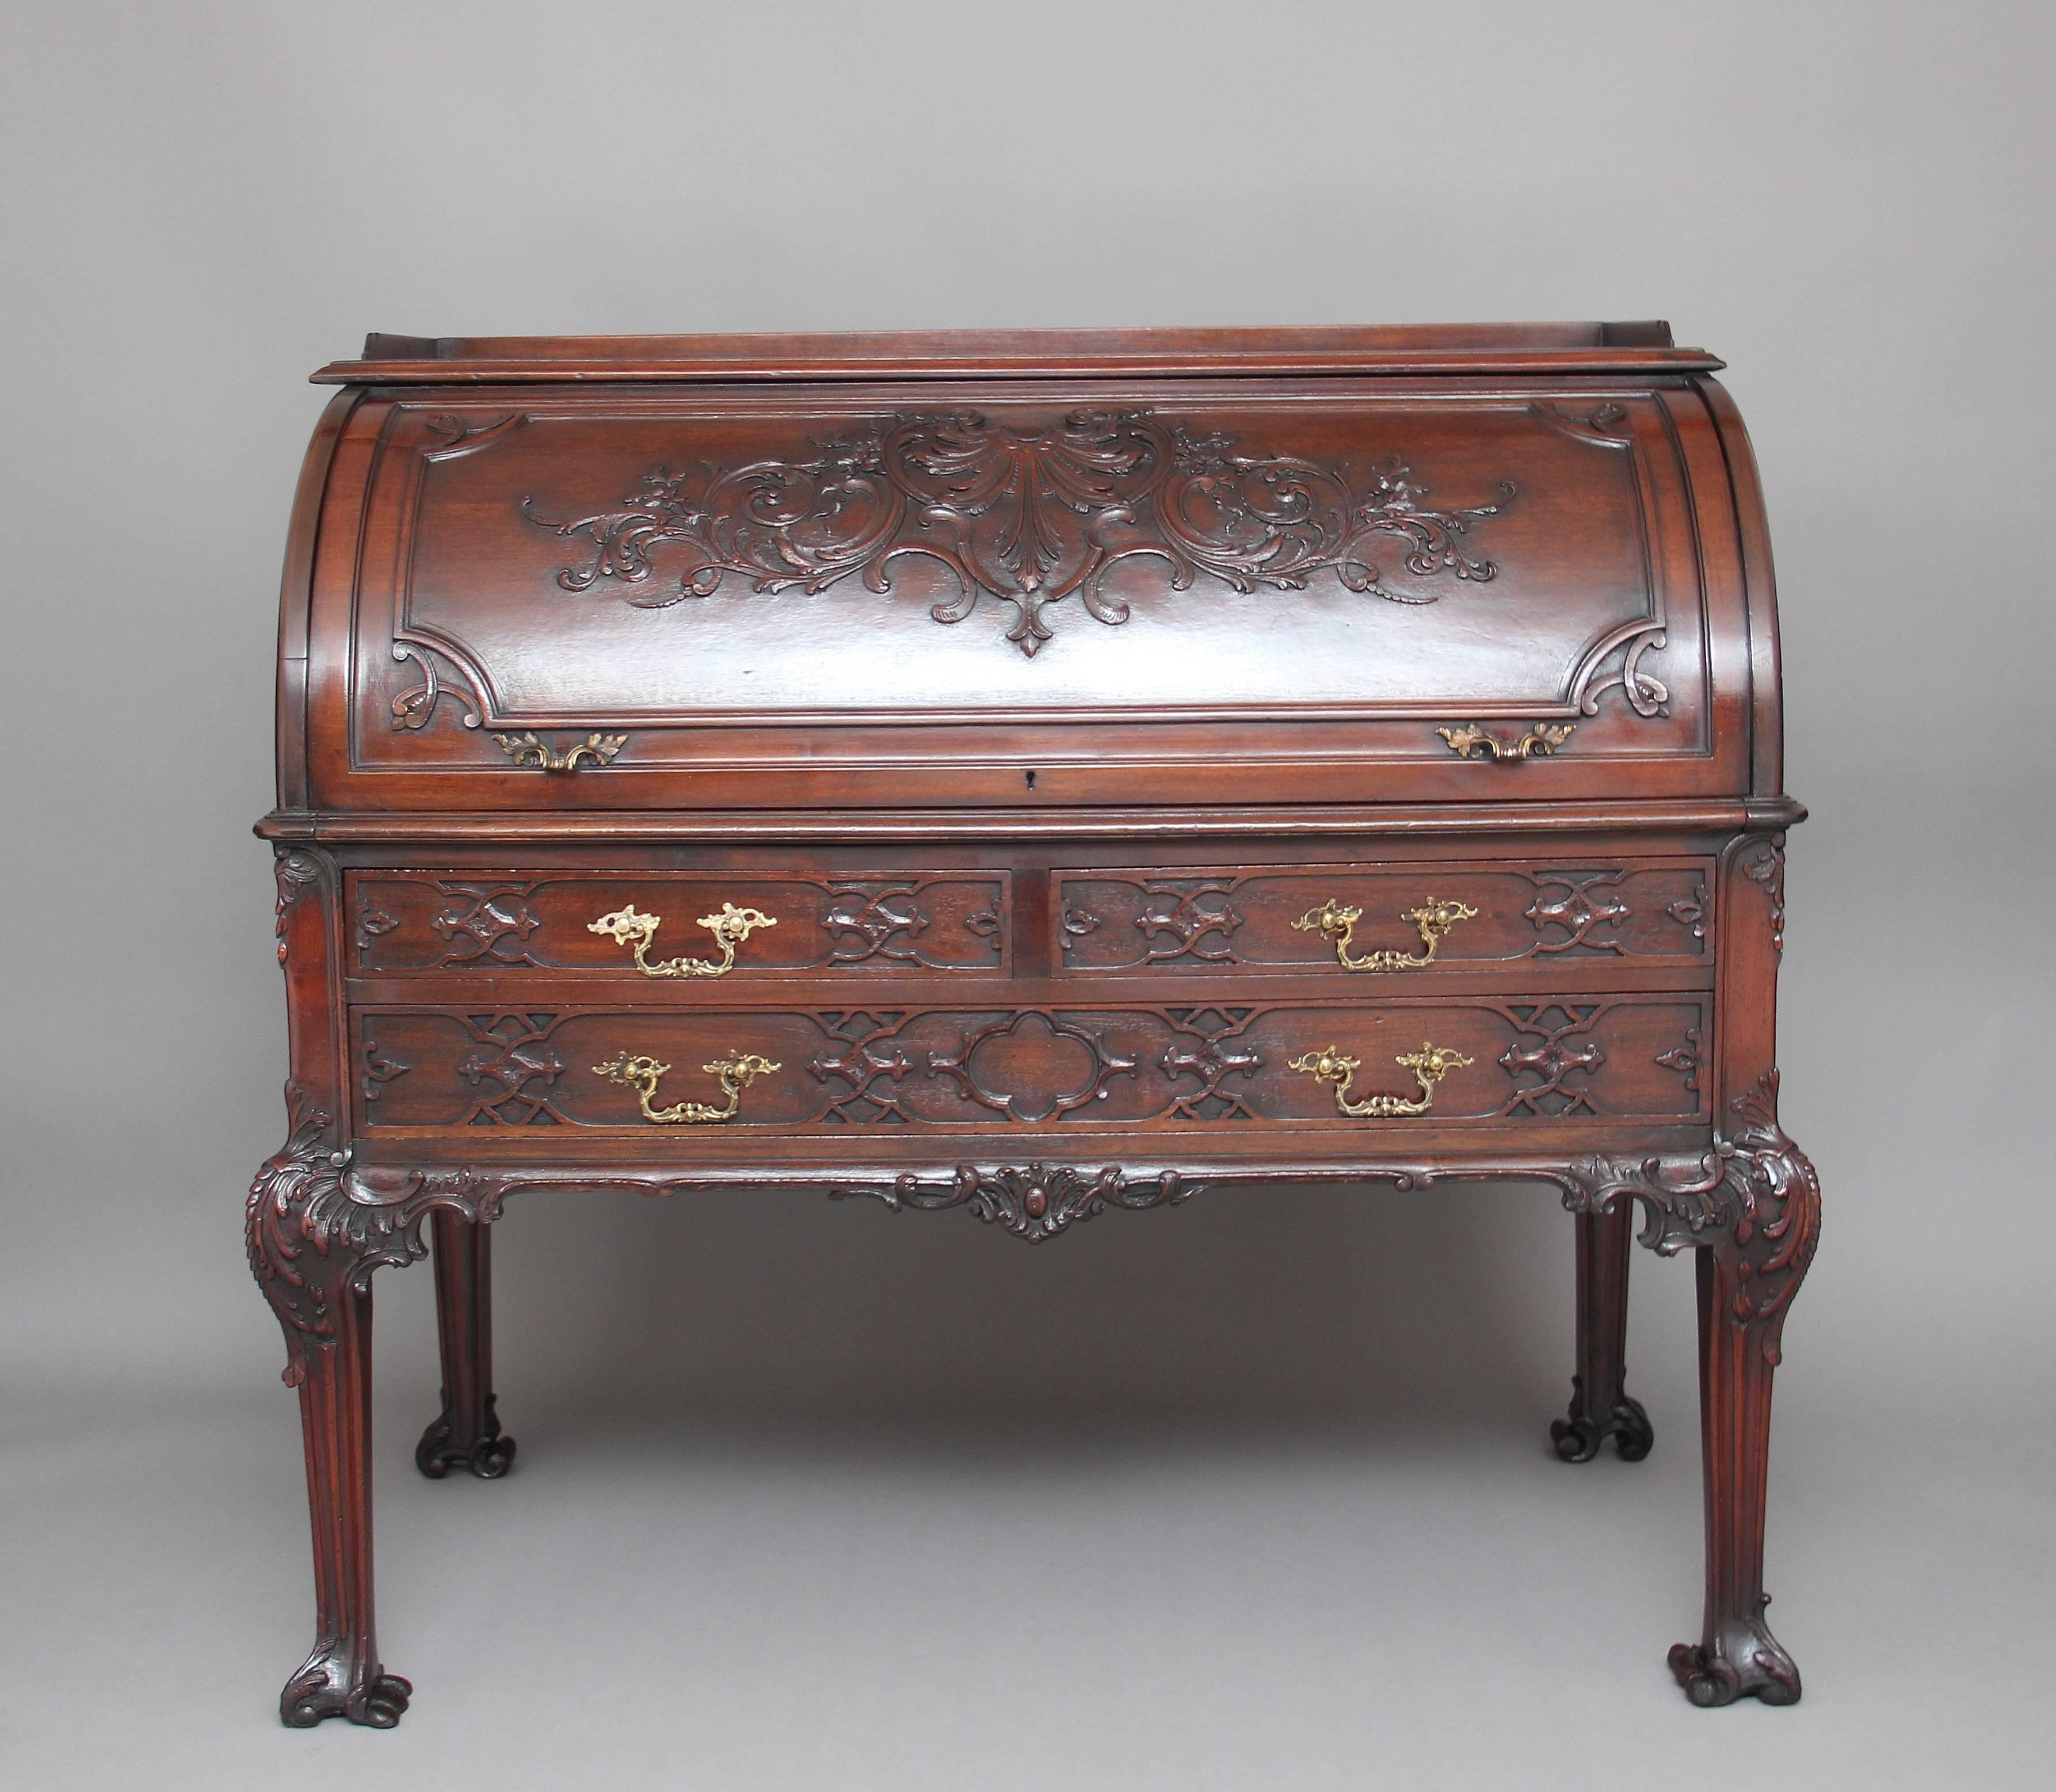 Early 20th century mahogany cylinder desk in the Chinese Chippendale style, the top has a gallery running along the sides and back, with the cylinder below is panelled and moulded with carving at the centre opening to reveal a leather writing